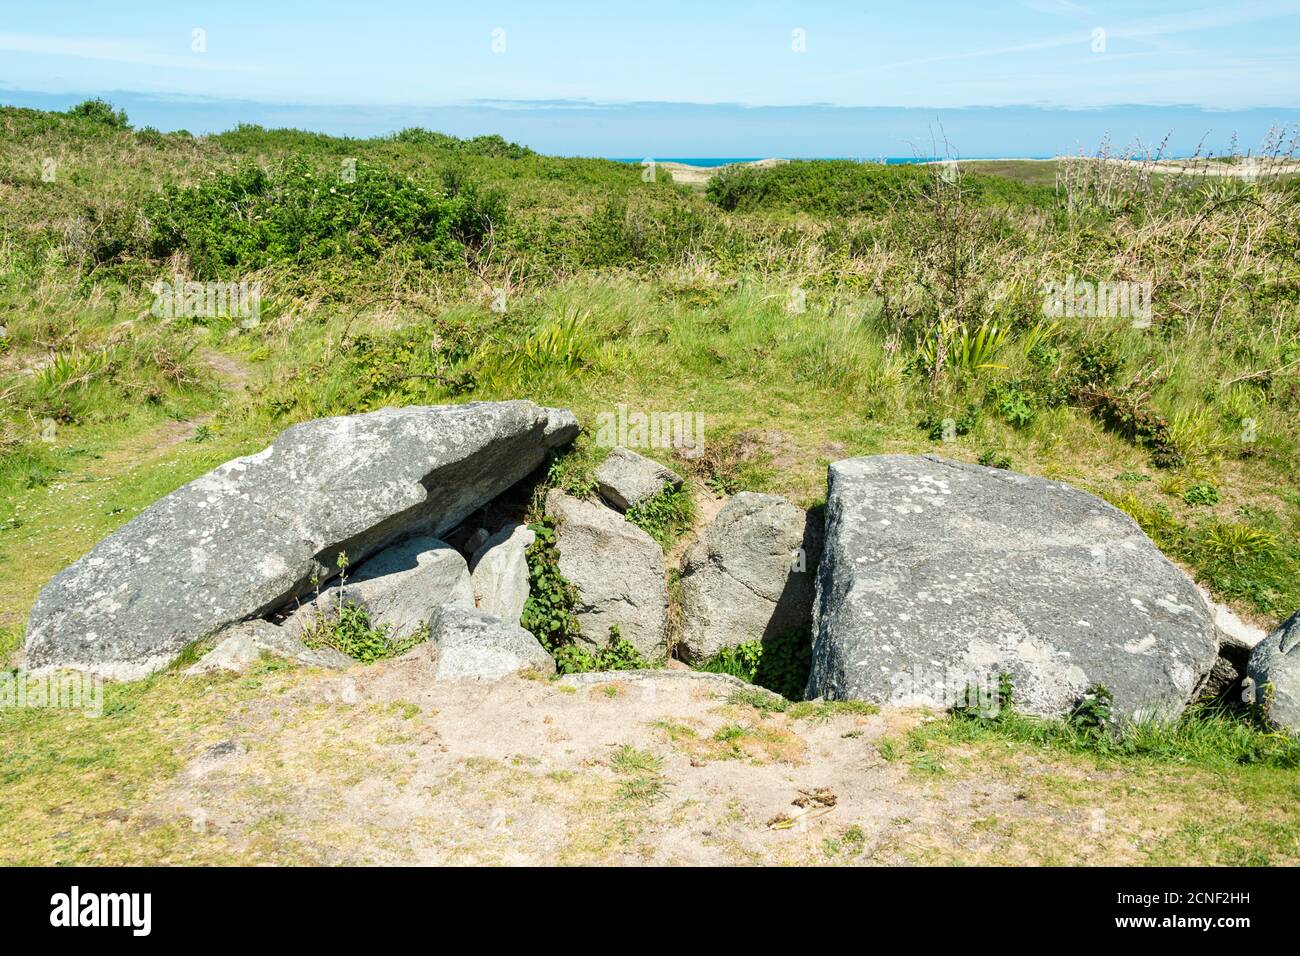 Robert's Cross is a Neolithic burial chamber (dolmen) on the north end of Herm Island, Guernsey, in the Channel Islands, UK. Stock Photo